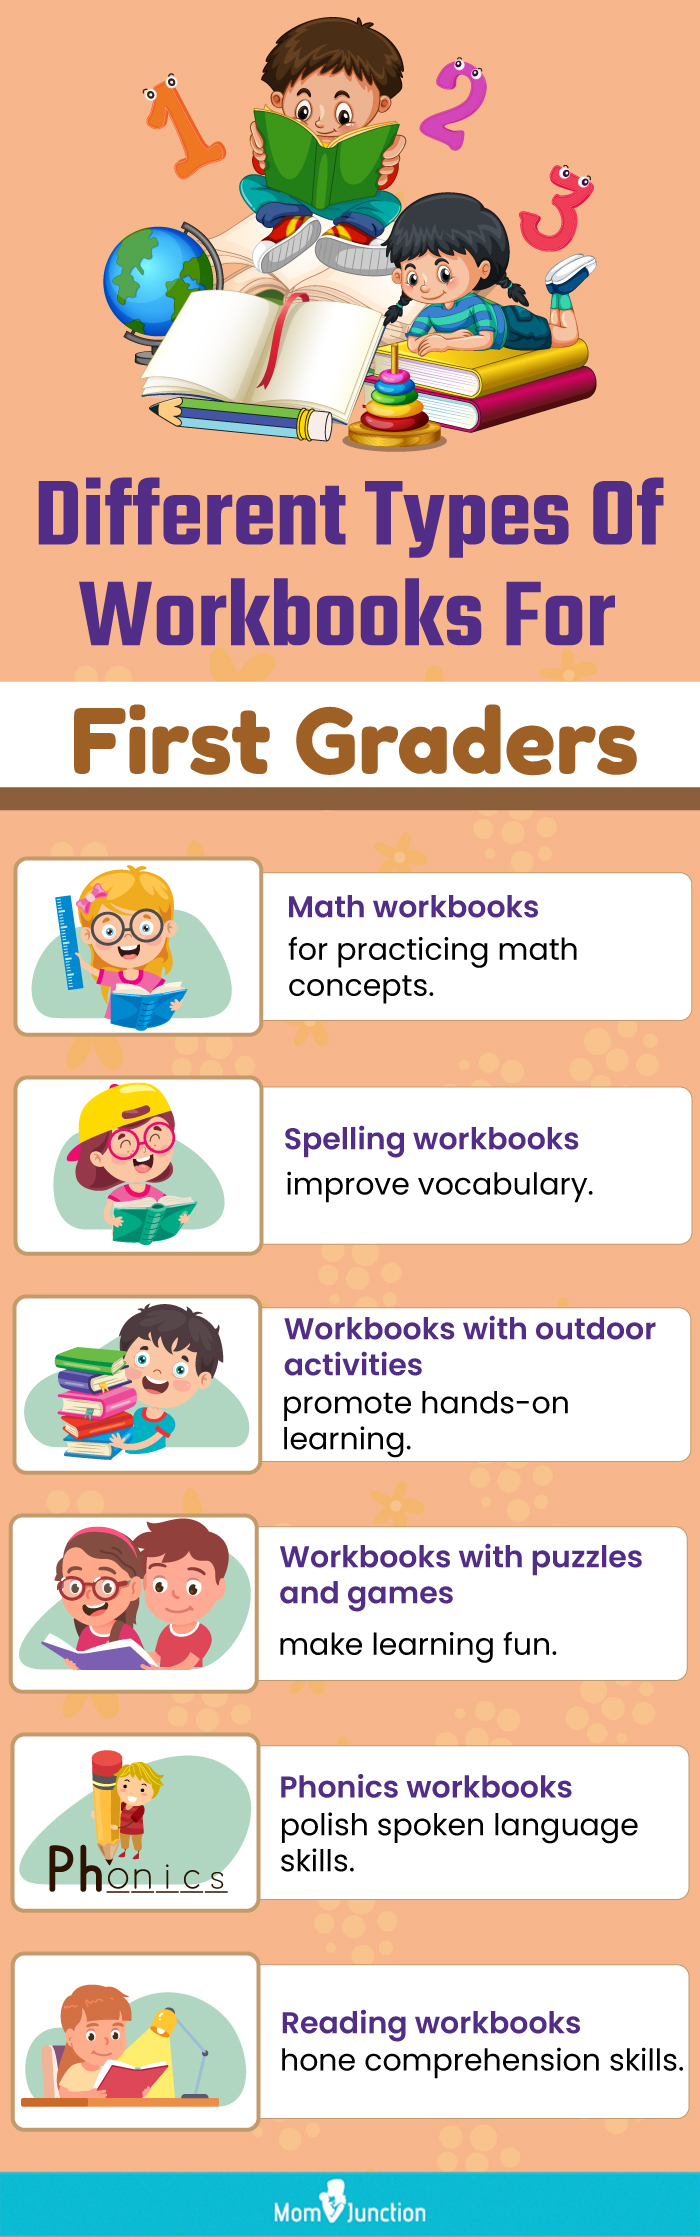 Different Types Of Workbooks For First Graders (infographic)